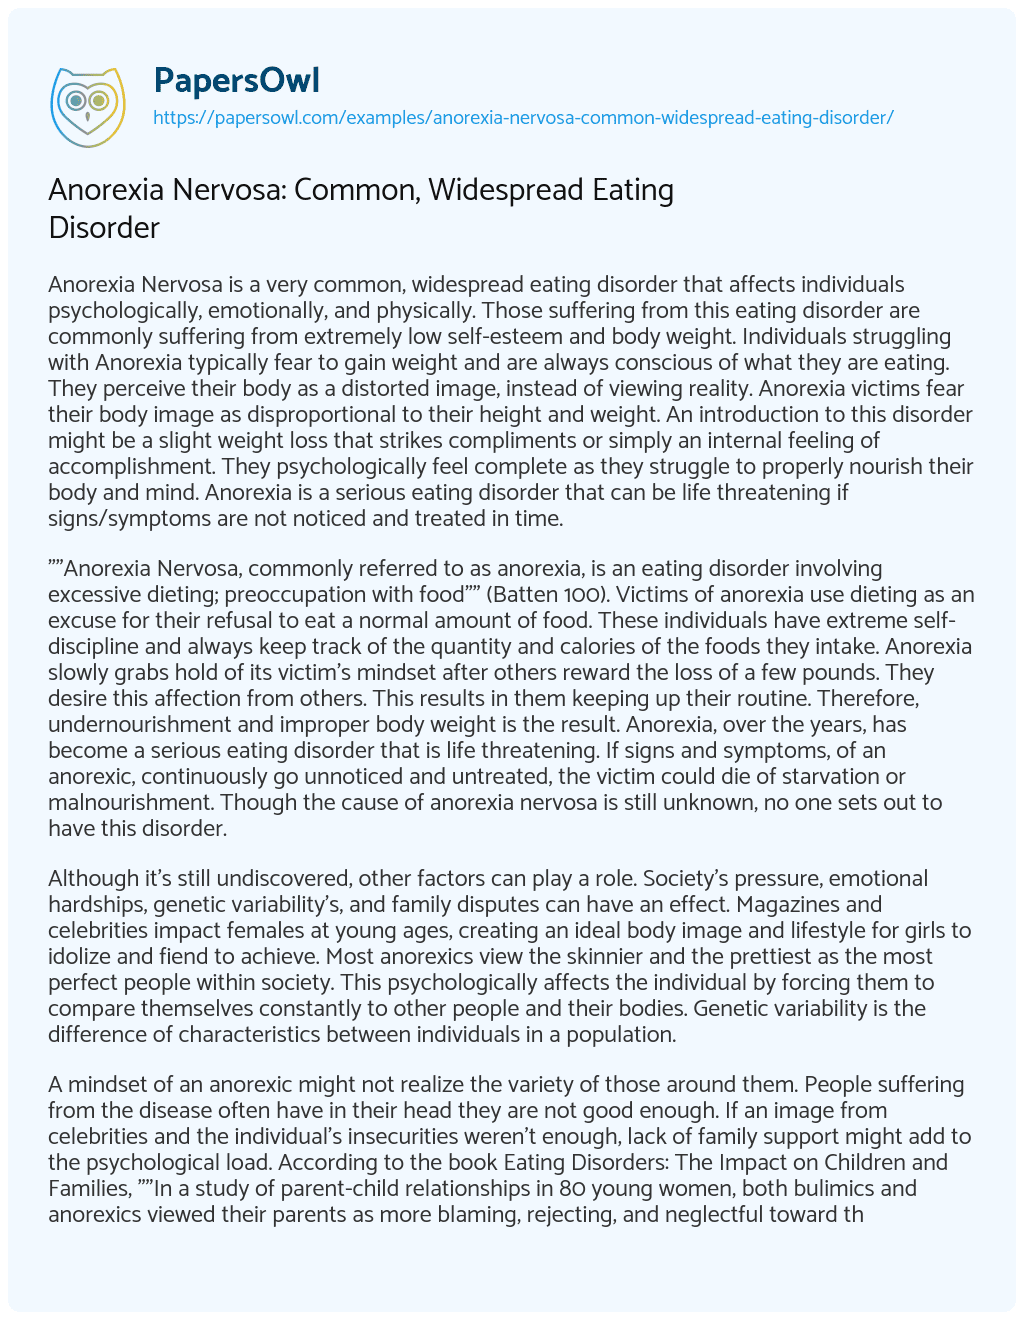 Essay on Anorexia Nervosa: Common, Widespread Eating Disorder